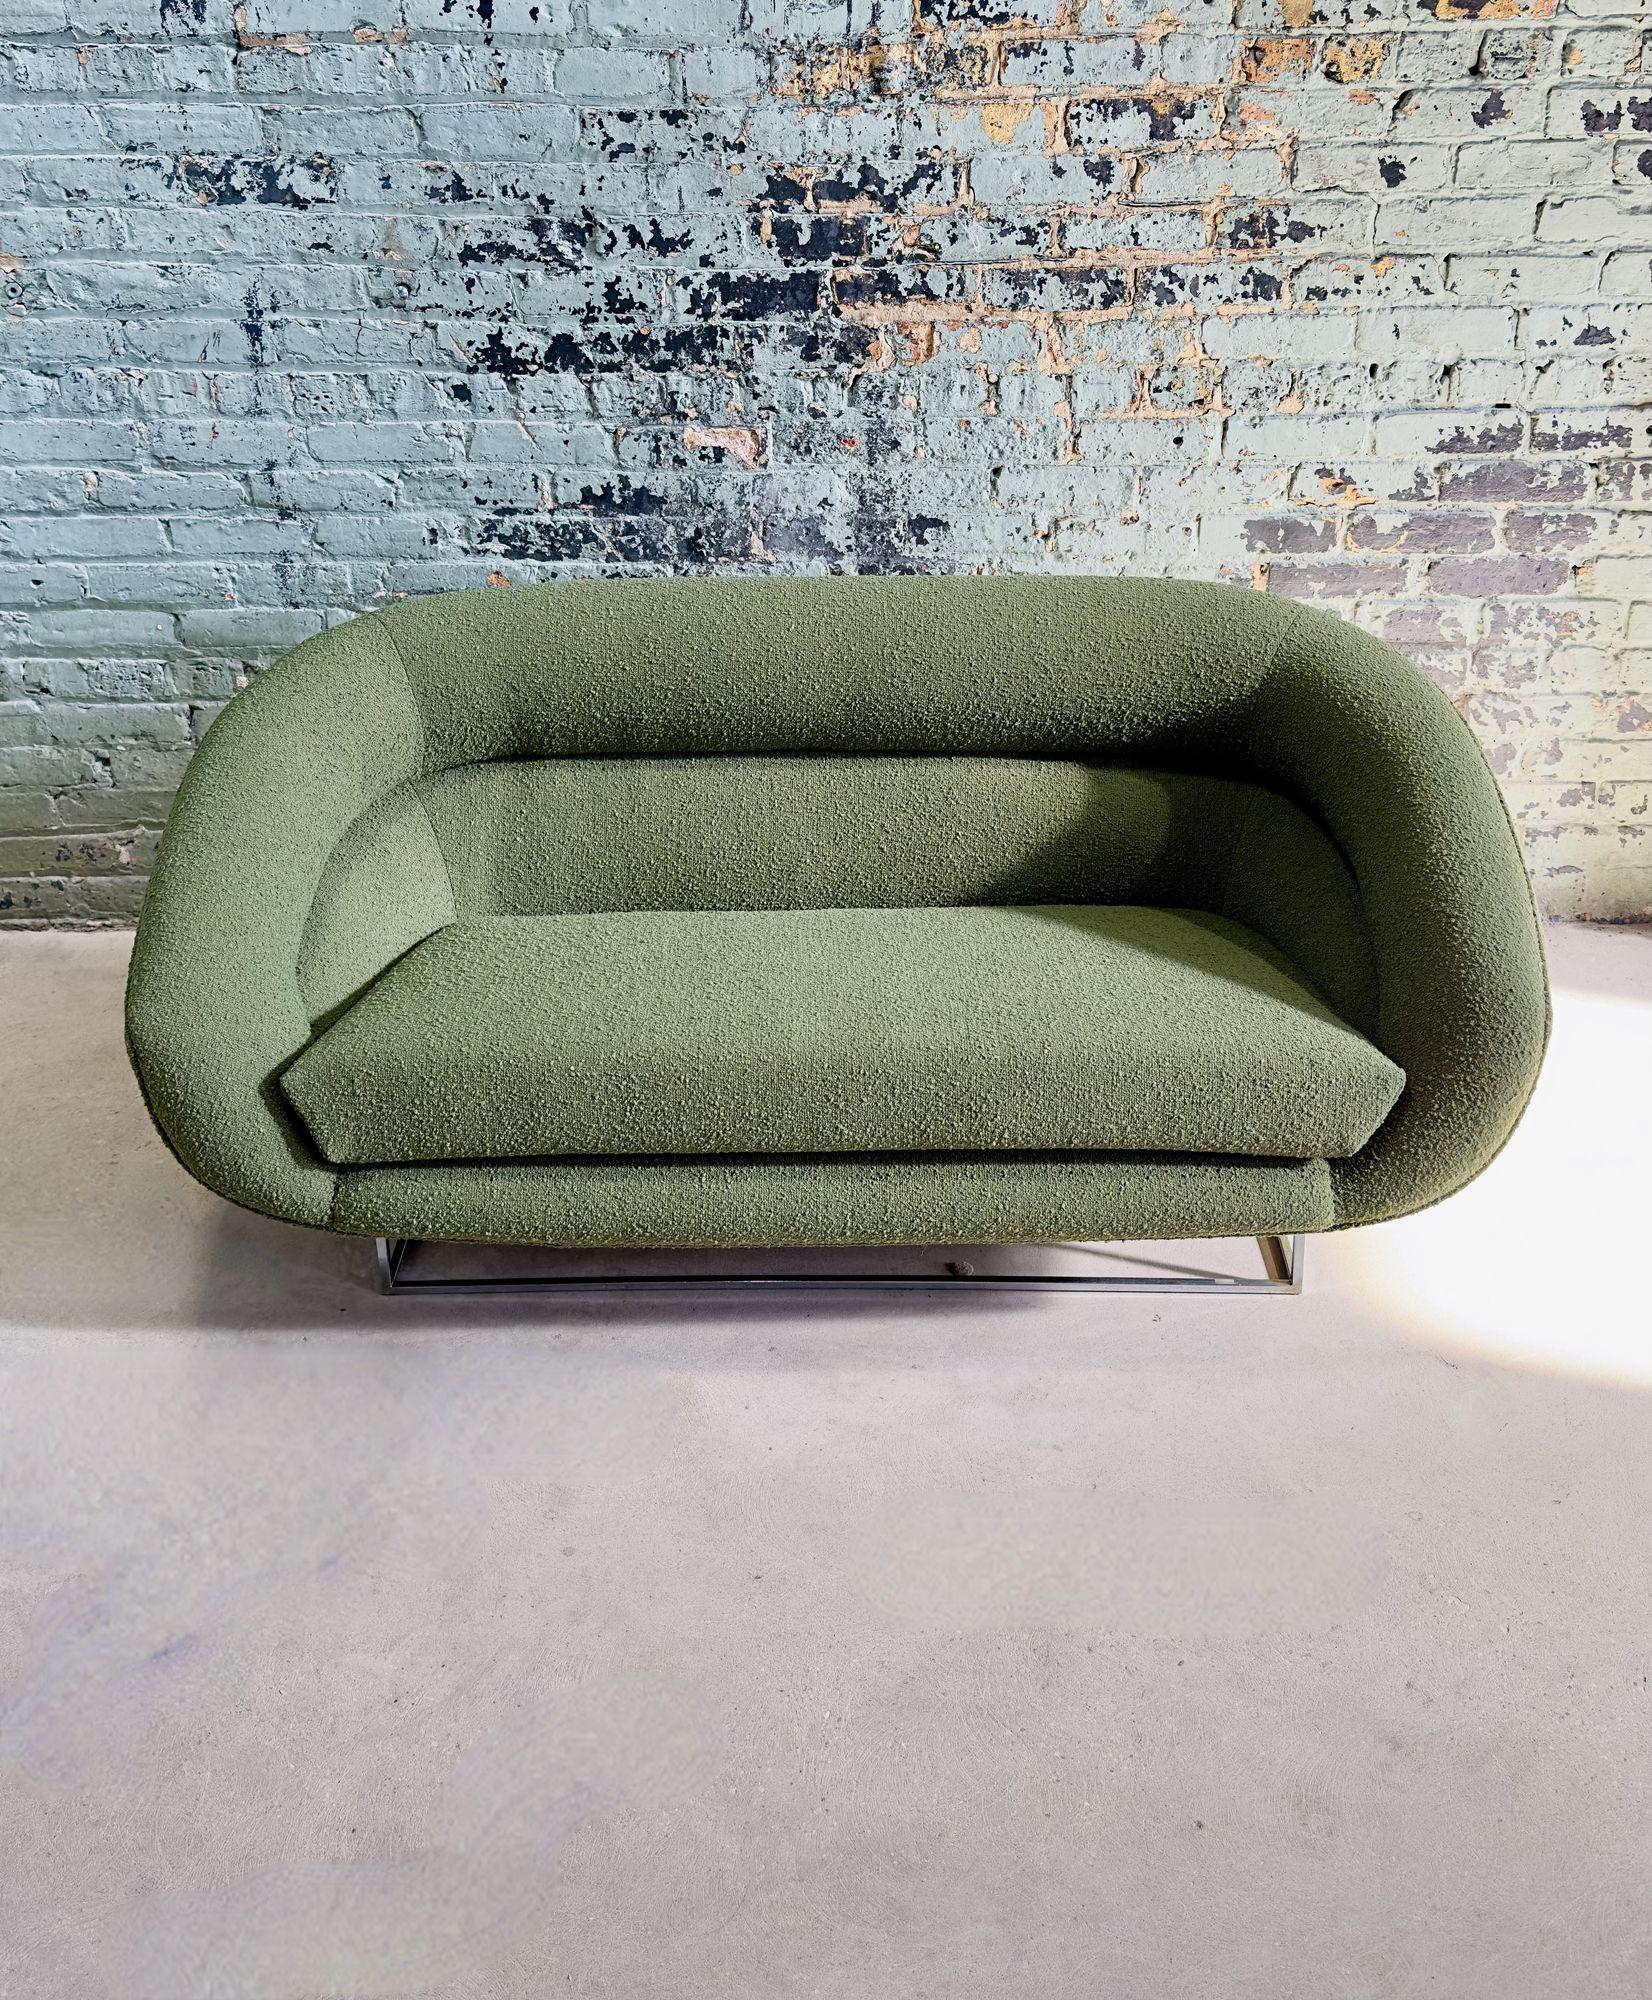 Milo Baughman Floating Sofa w/Chrome Base, 1960. Newly reupholstered in green boucle.
Measures 57